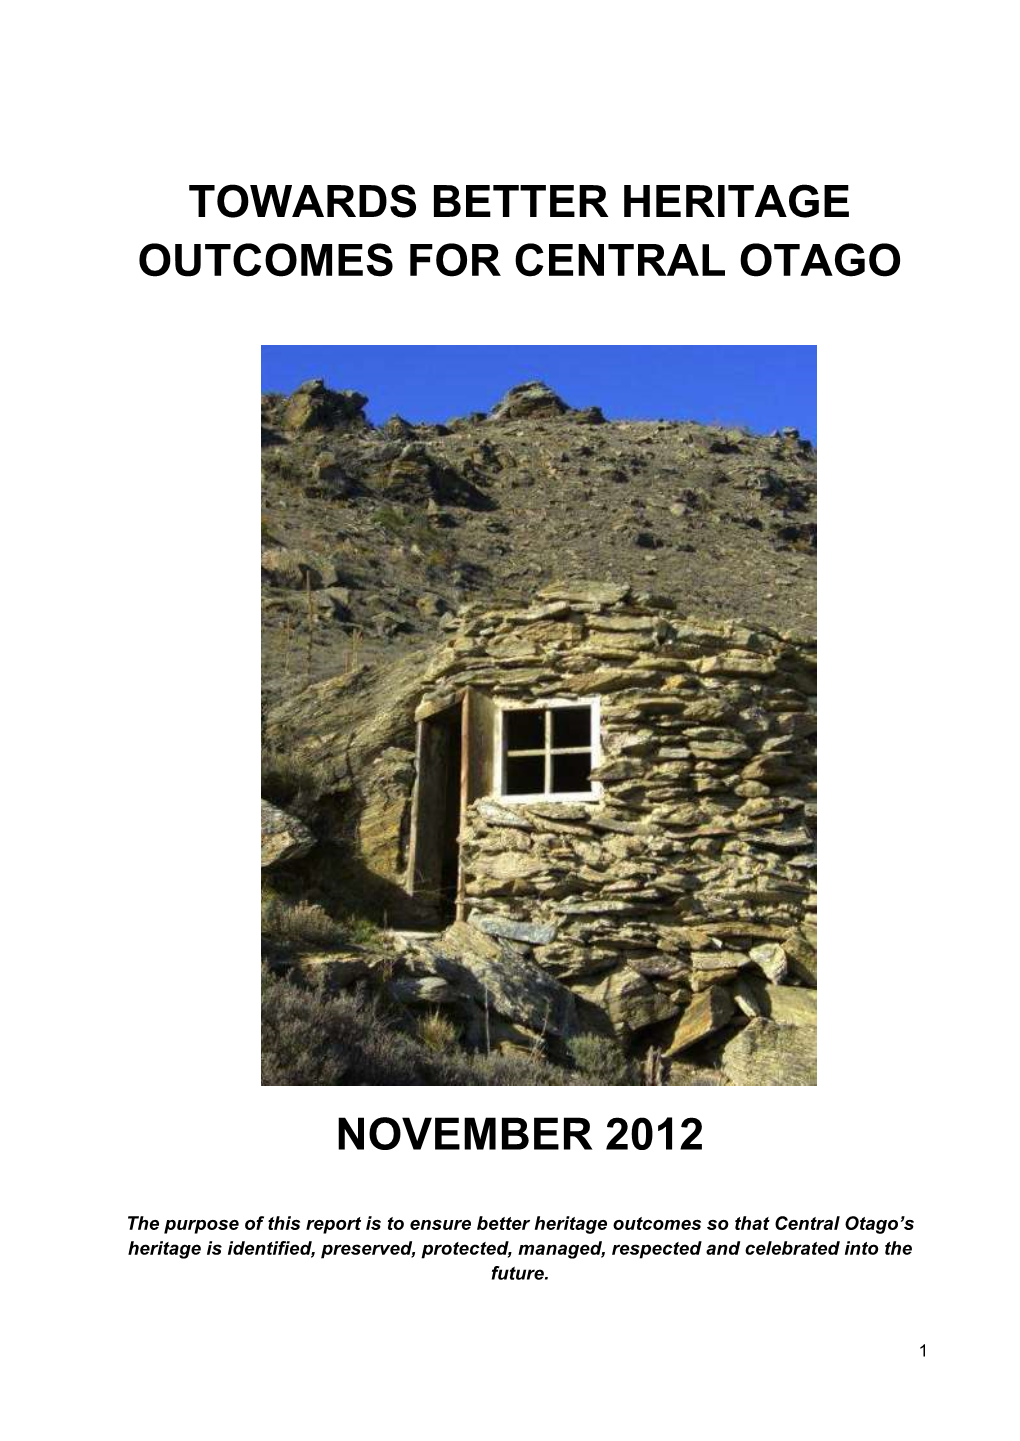 Towards Better Heritage Outcomes for Central Otago November 2012